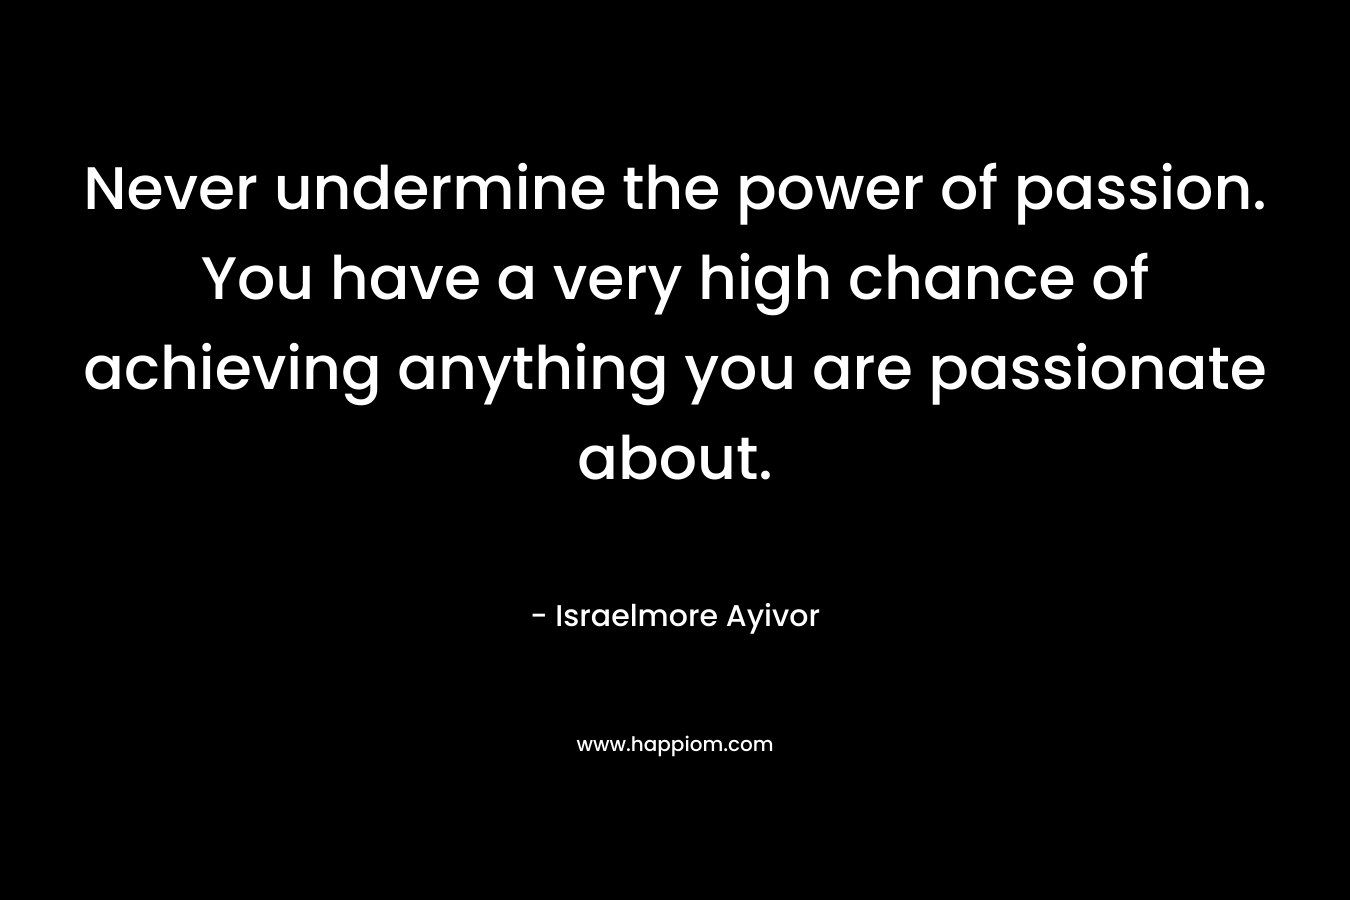 Never undermine the power of passion. You have a very high chance of achieving anything you are passionate about.